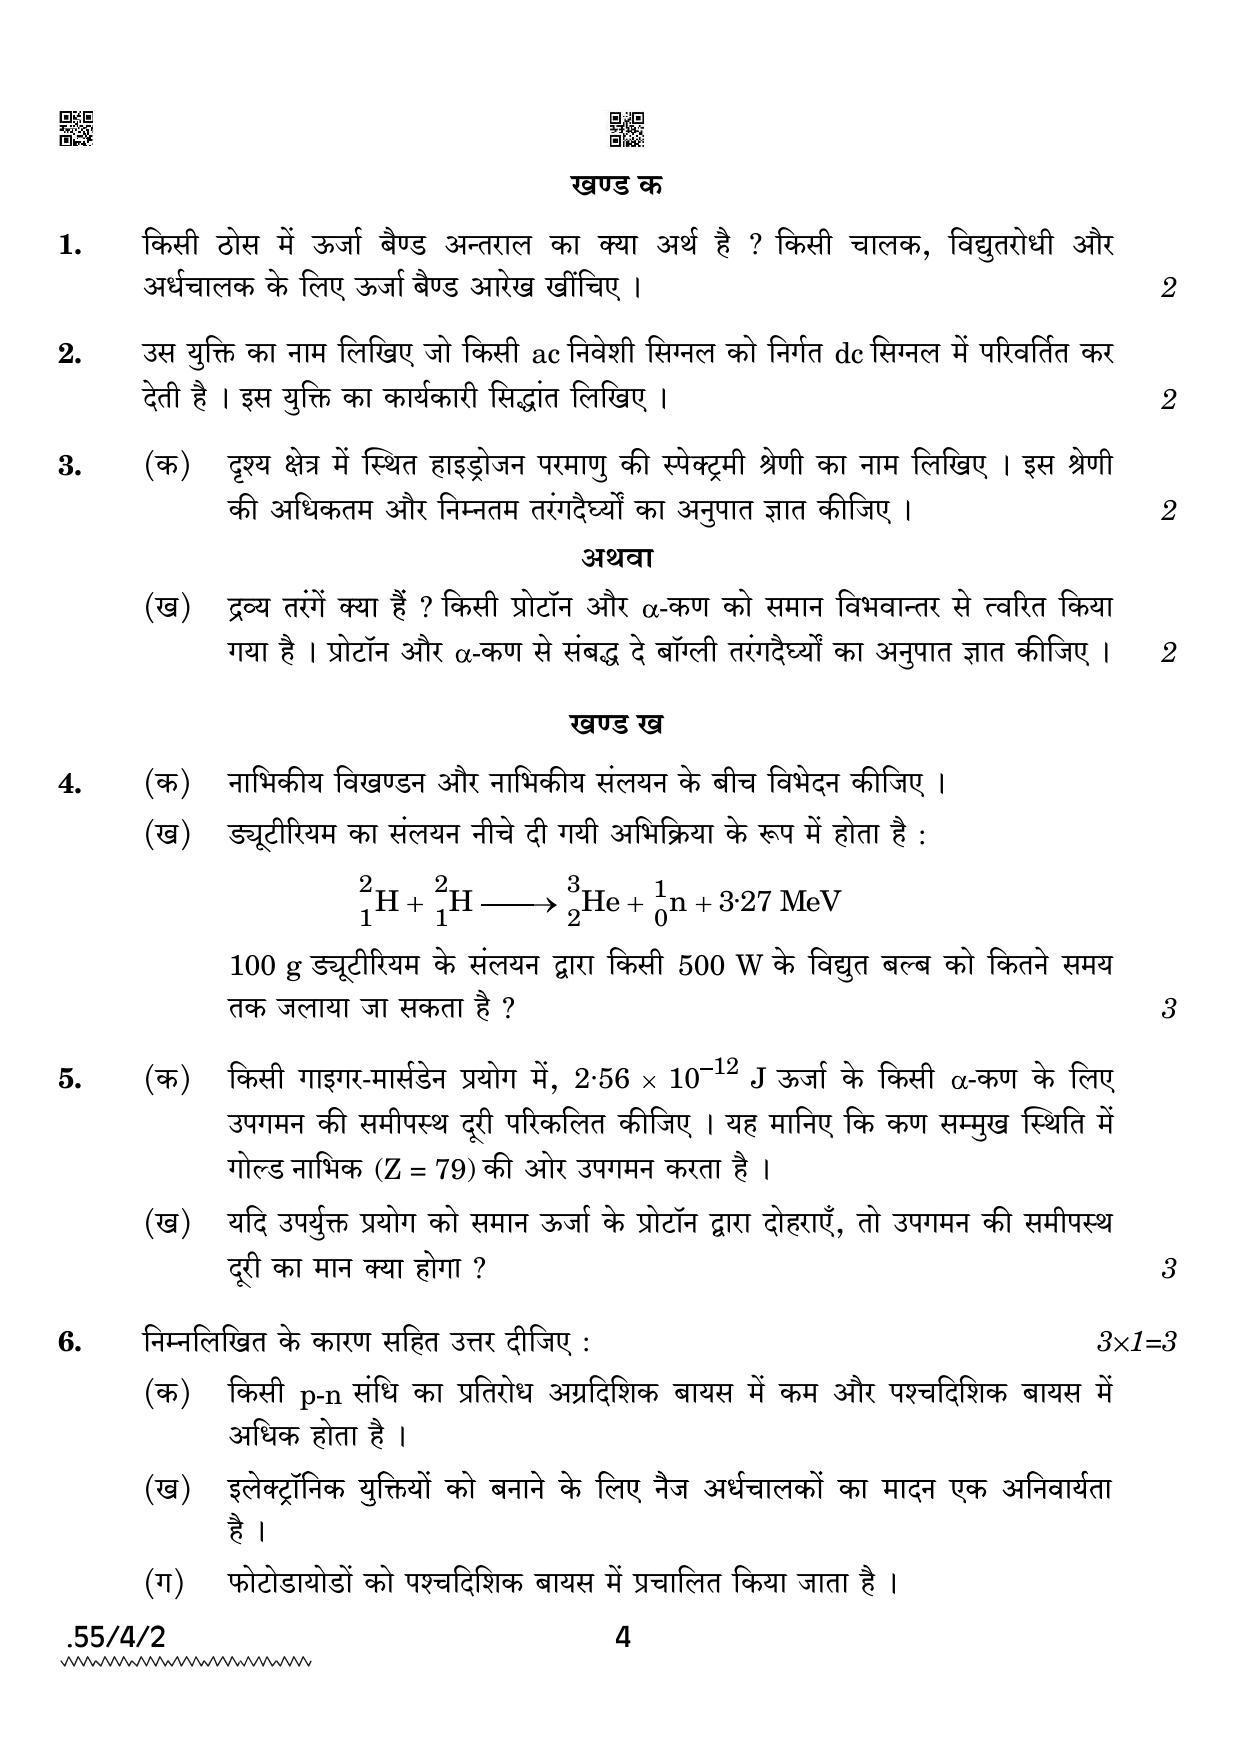 CBSE Class 12 55-4-2 Physics 2022 Question Paper - Page 4